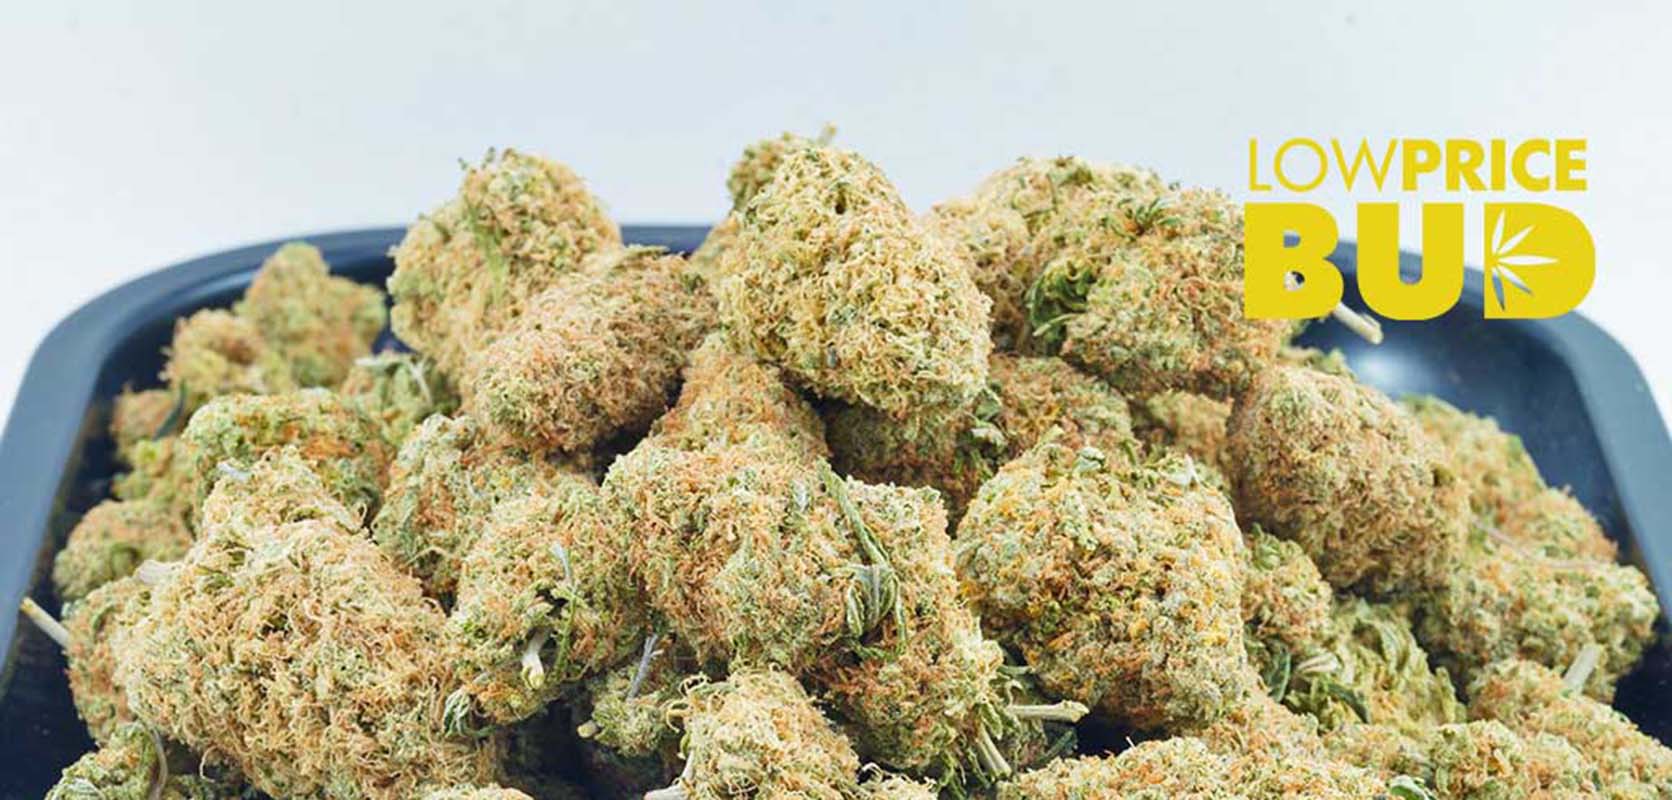 AA Girl Scout Cookies weed from online dispensary low price bud. Buy cannabis online, juicy fruit strain, dolato strain, jelly breath strain online dispensary cannabis canada.